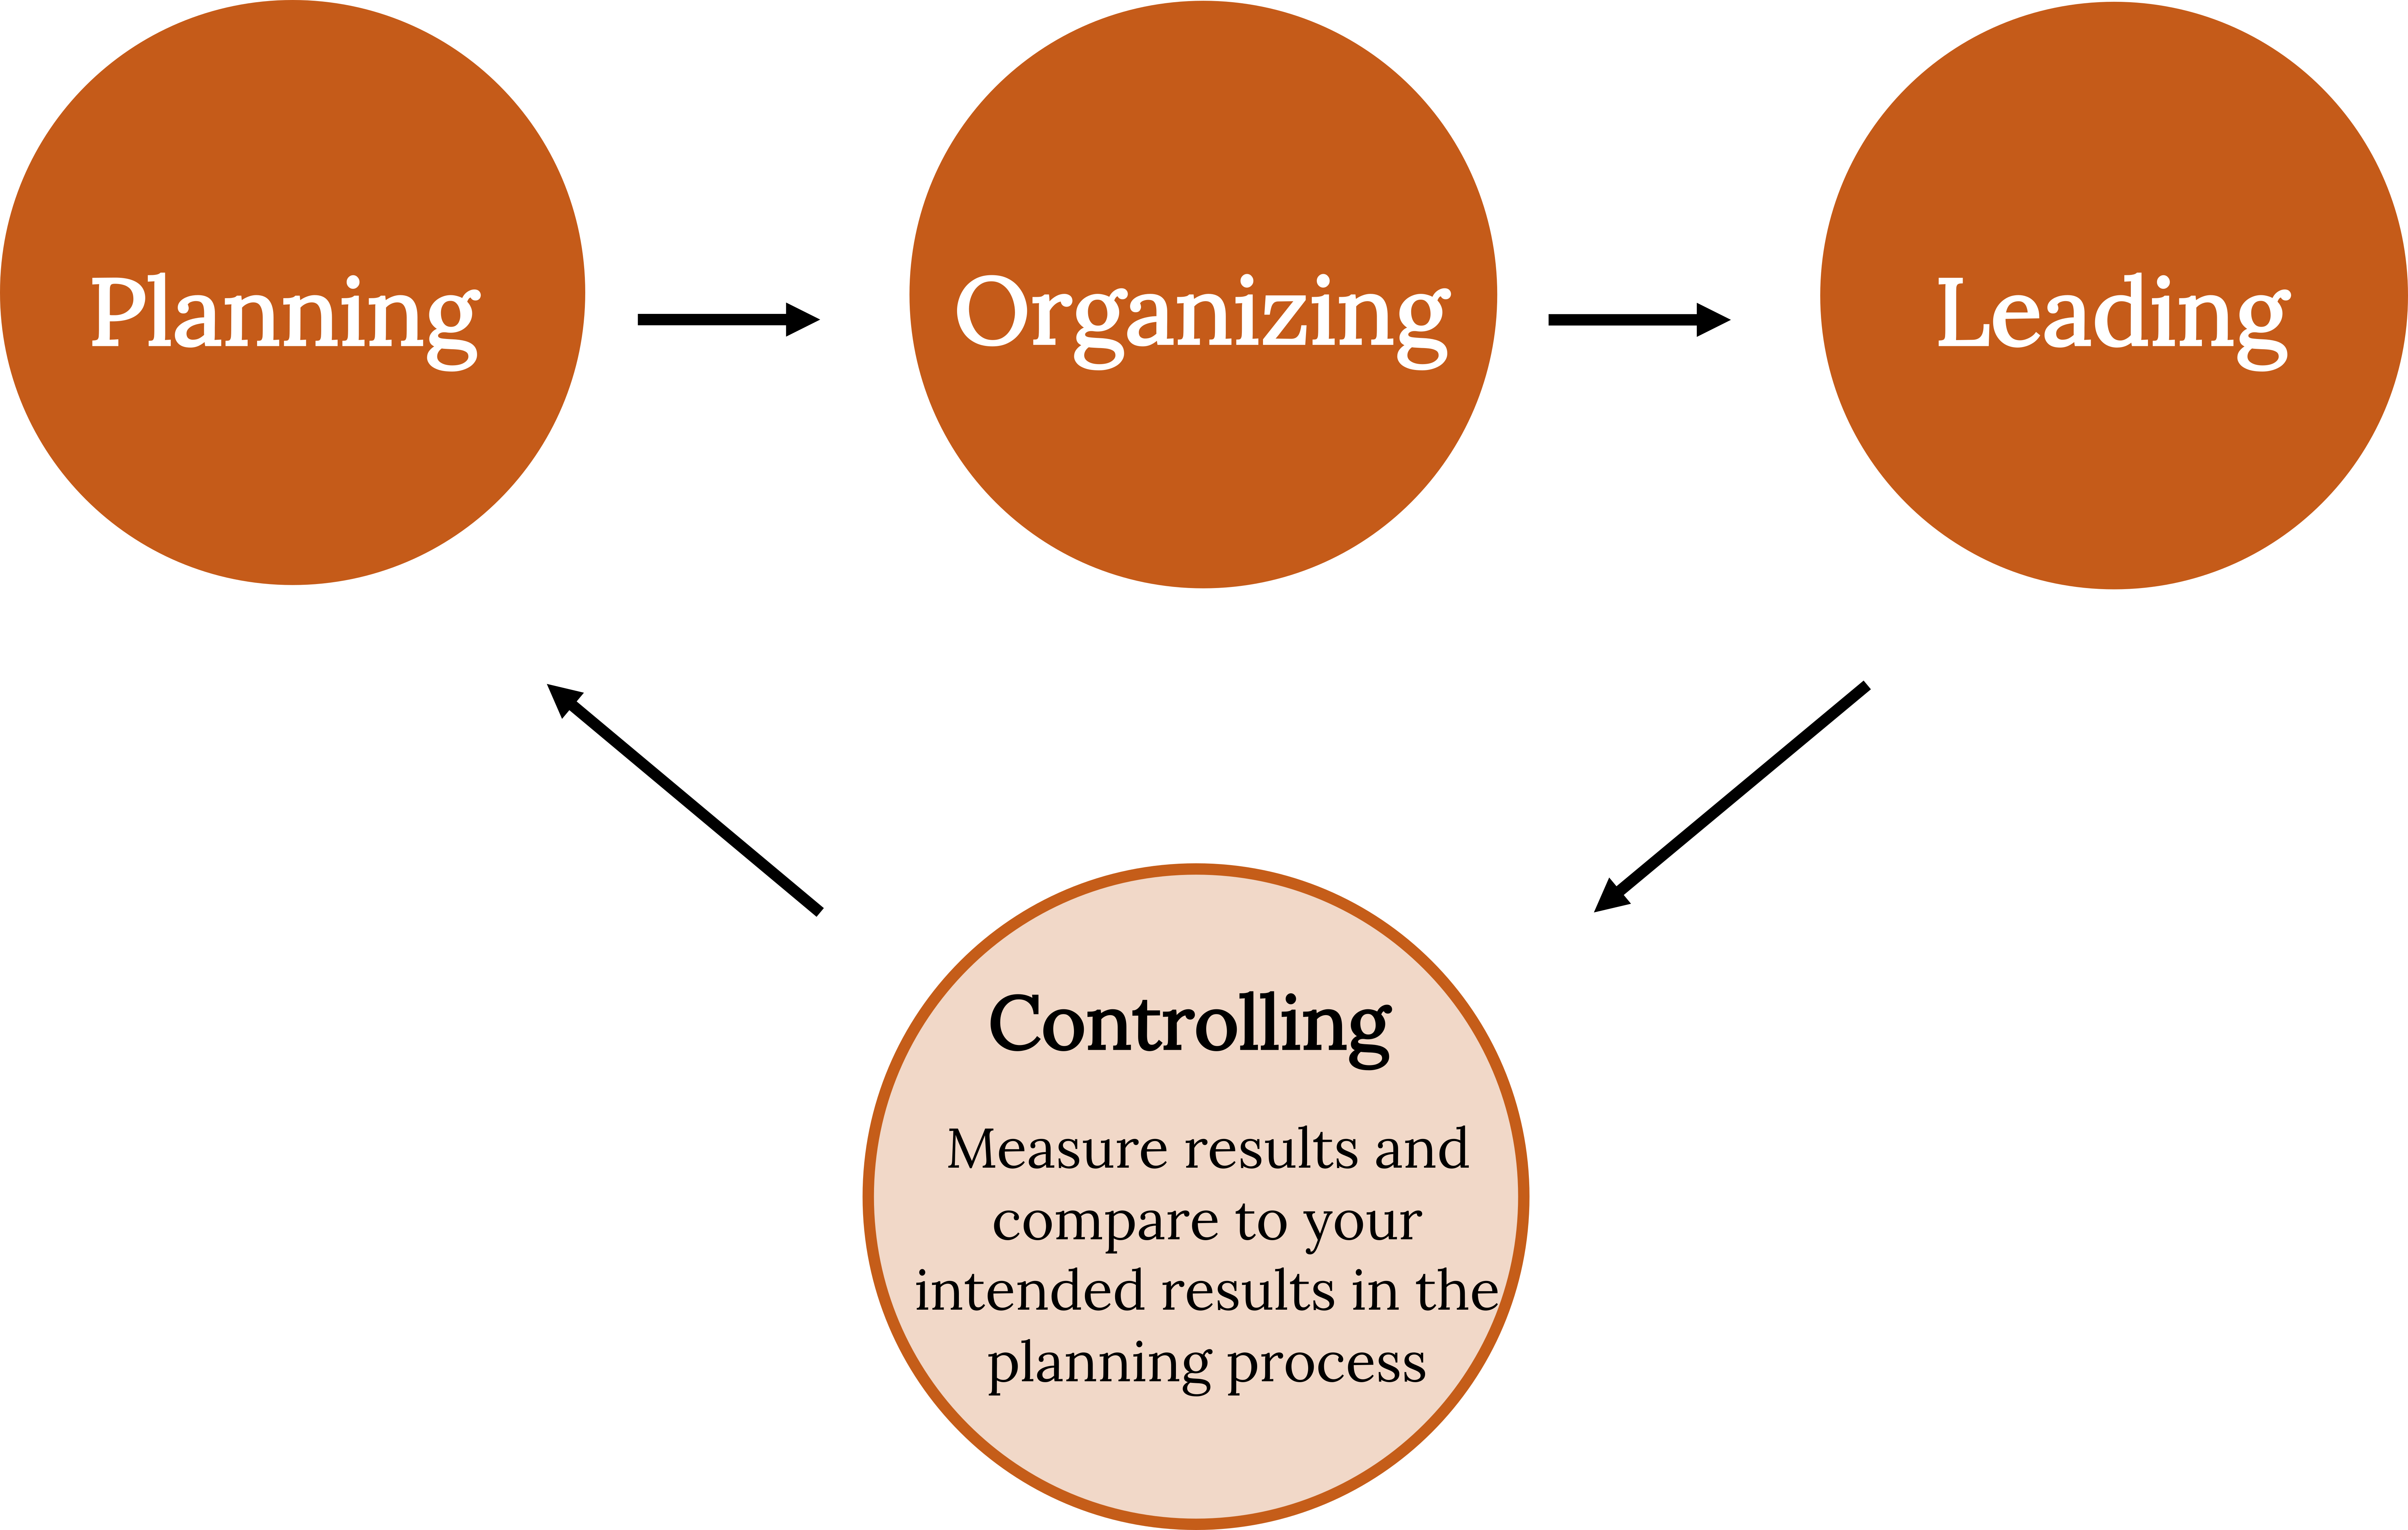 A flow chart of the Management Process, laid out as 3 circles beside each other horizontally with a right-pointing arrow between each. From left to right the boxes read: Planning, Organizing, and Leading. An arrow points from the Leading circle to a fourth circle that is placed below these three labeled Controlling with the caption 'measure results and compare to your intended results in the planning process'. An arrow points from the “Controlling” box back around to the “Planning” box to show a continuous path.